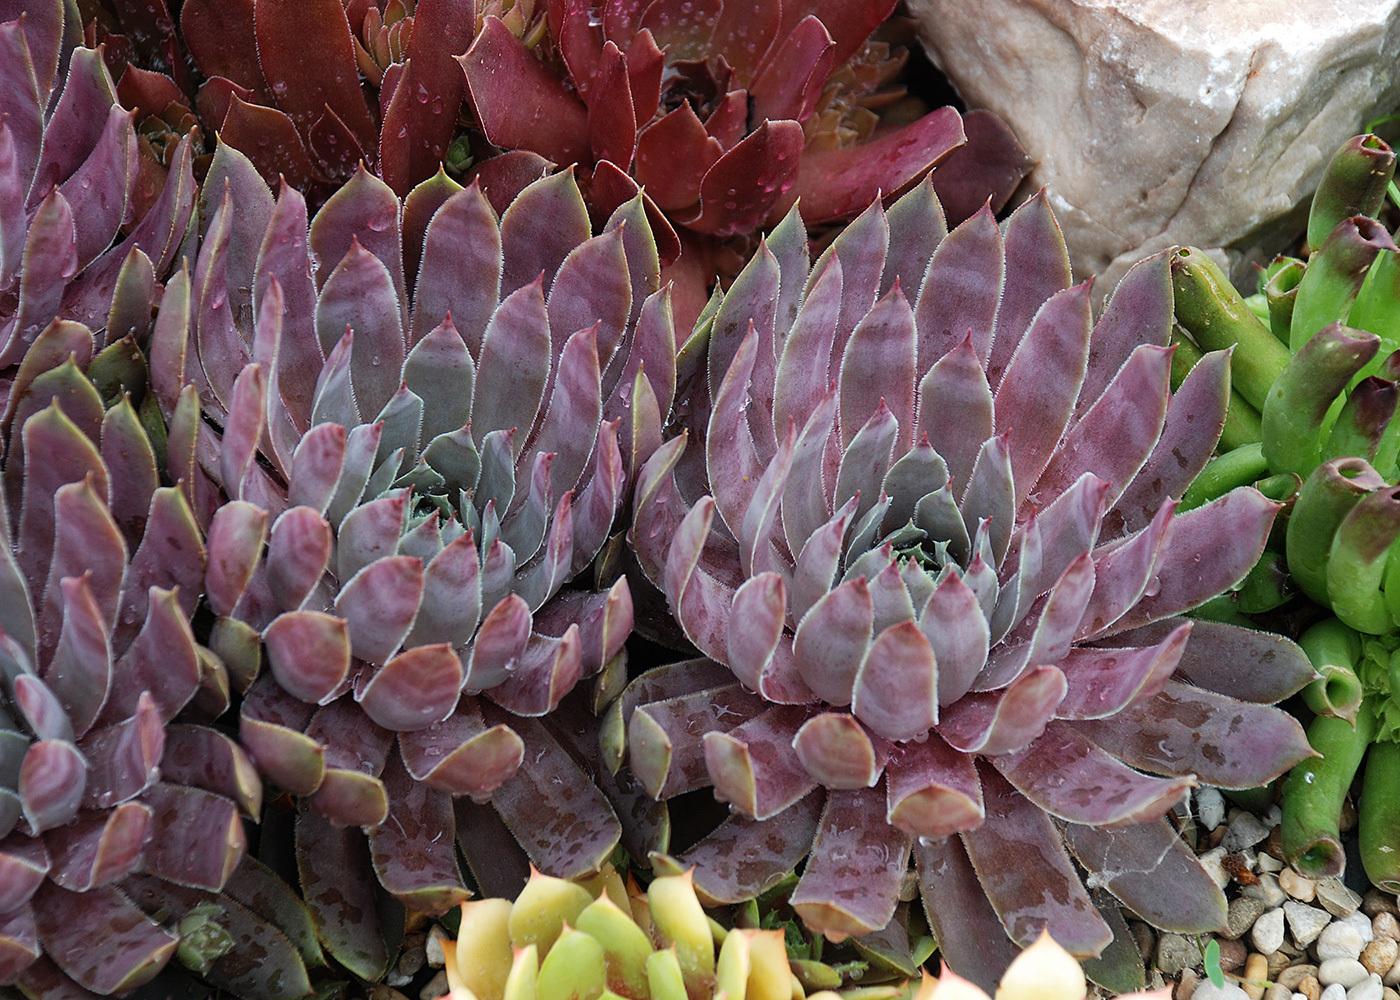 Photo of Hen and Chicks (Sempervivum 'Pacific Blue Ice') uploaded by Calif_Sue